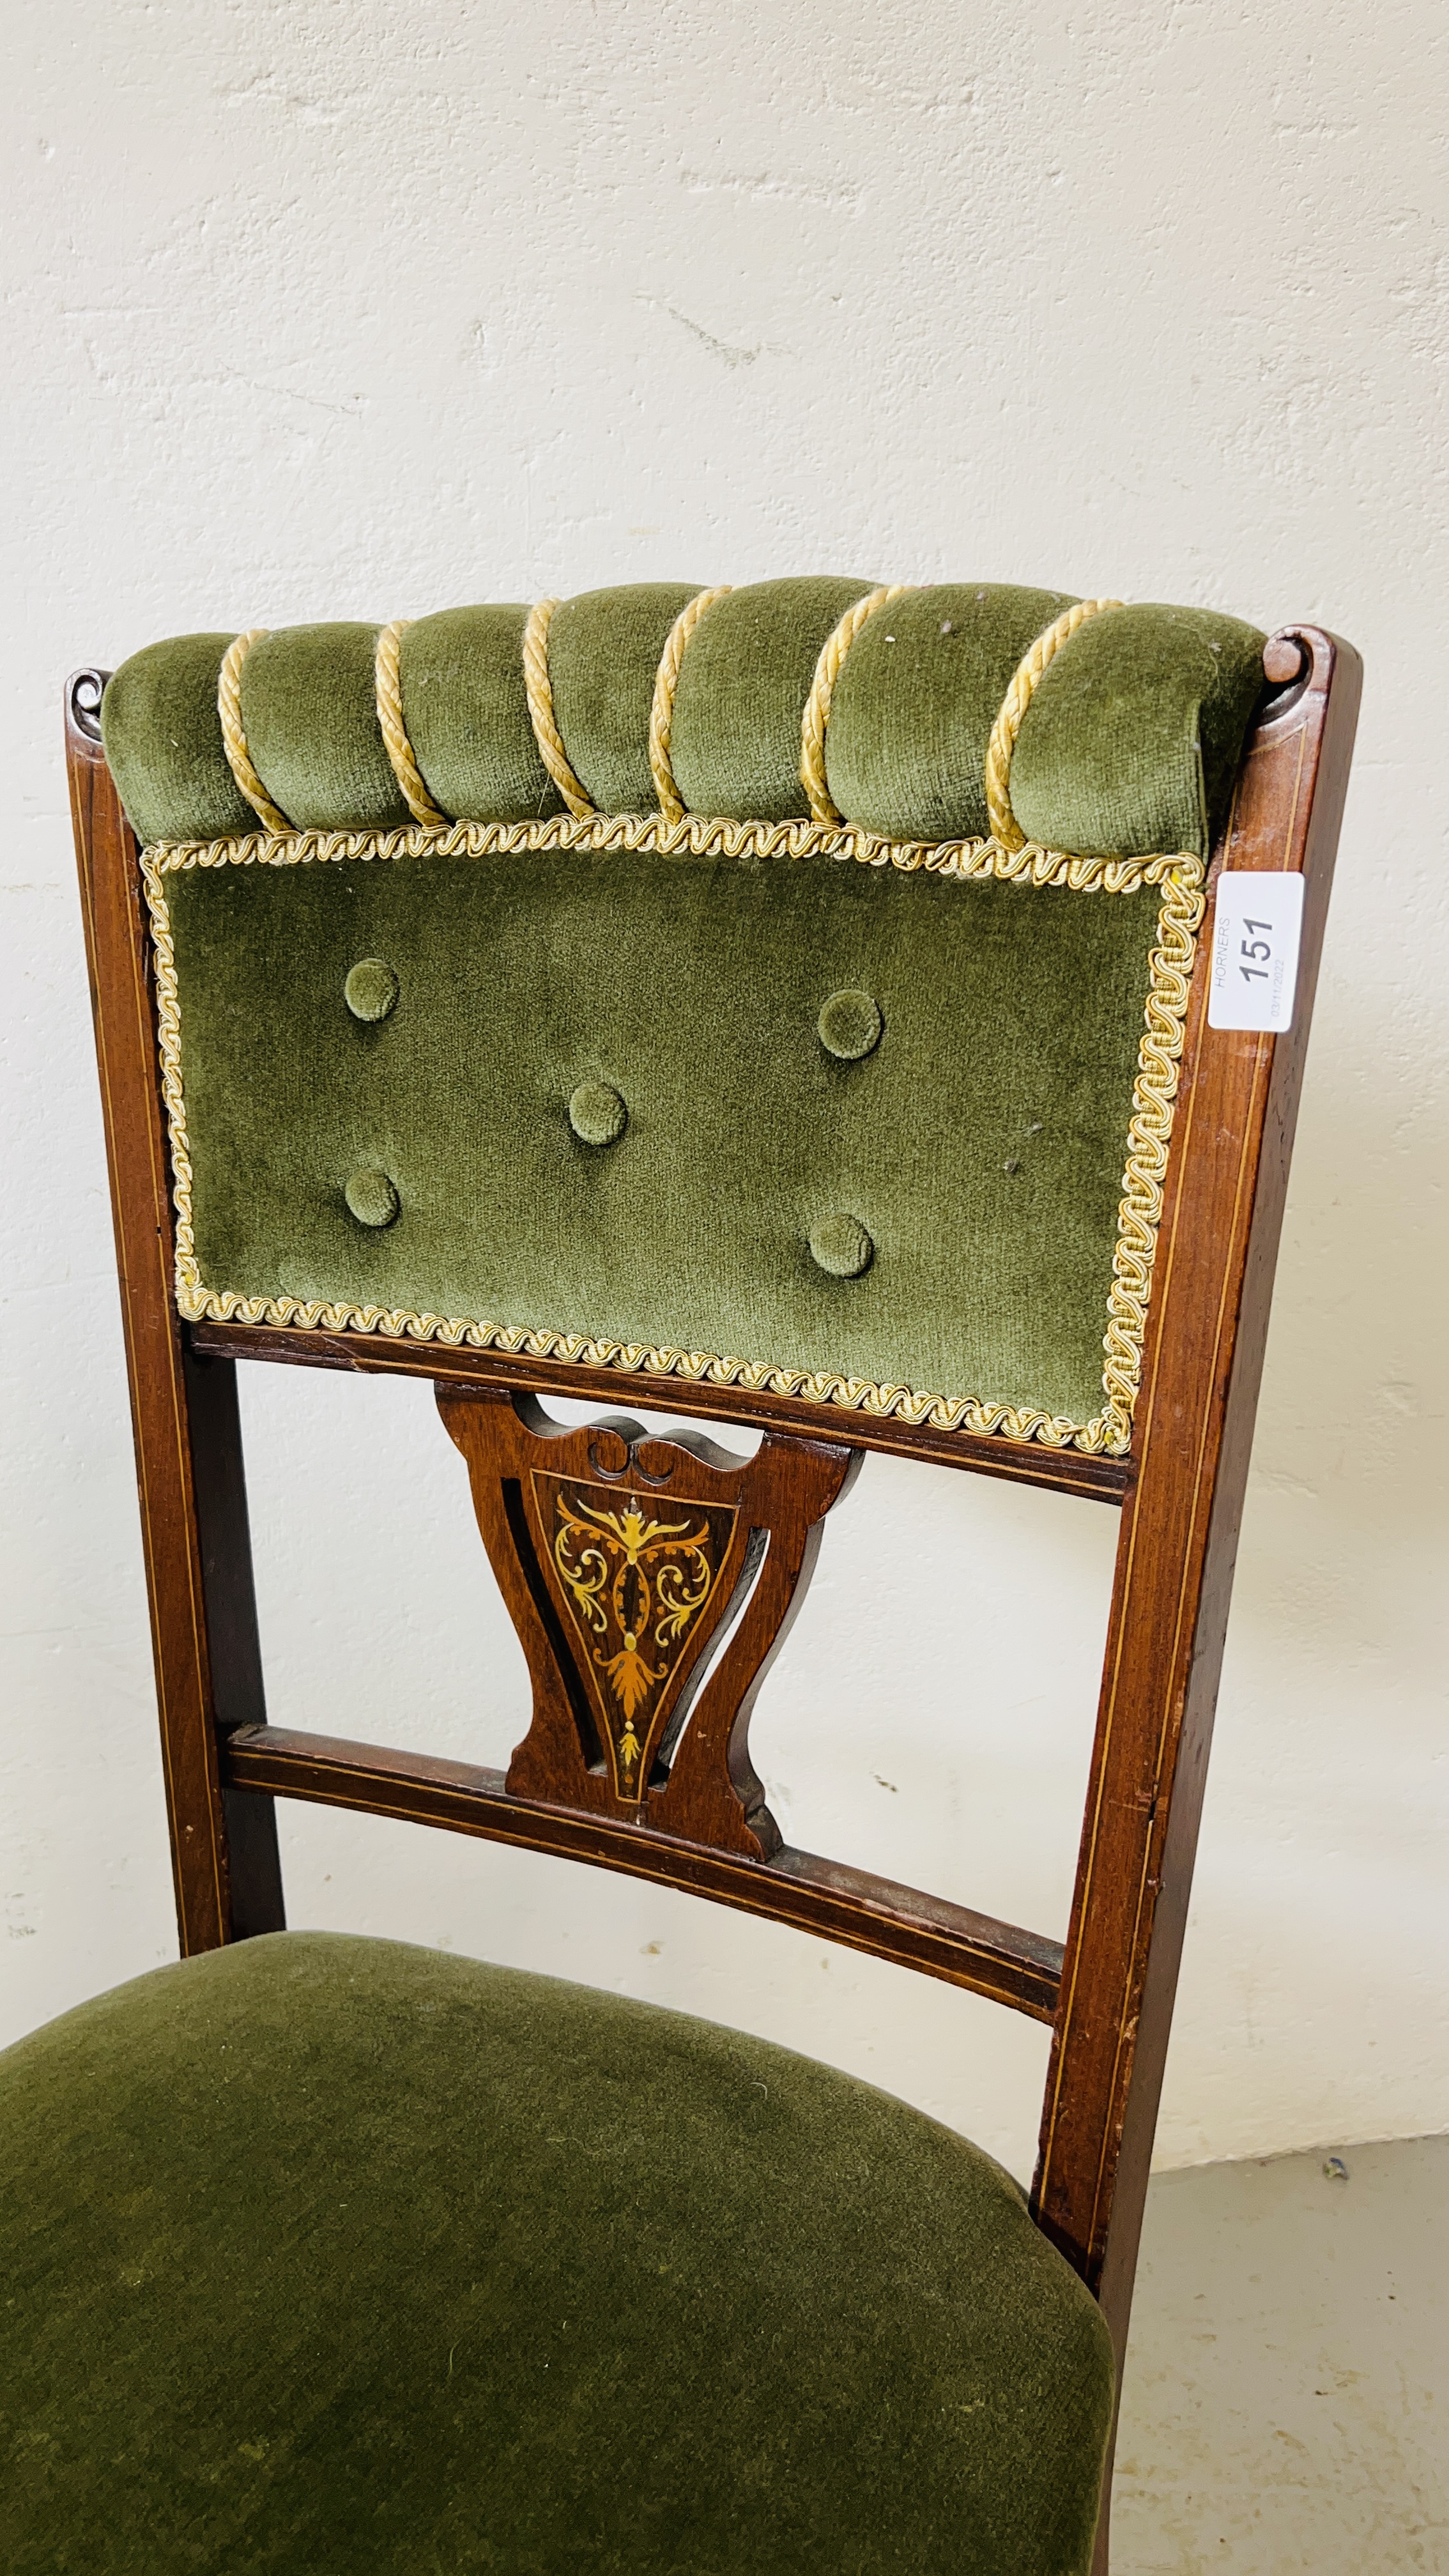 AN ANTIQUE EDWARDIAN INLAID FRET WORK DETAIL GREEN UPHOLSTERED CHAIR. - Image 2 of 7